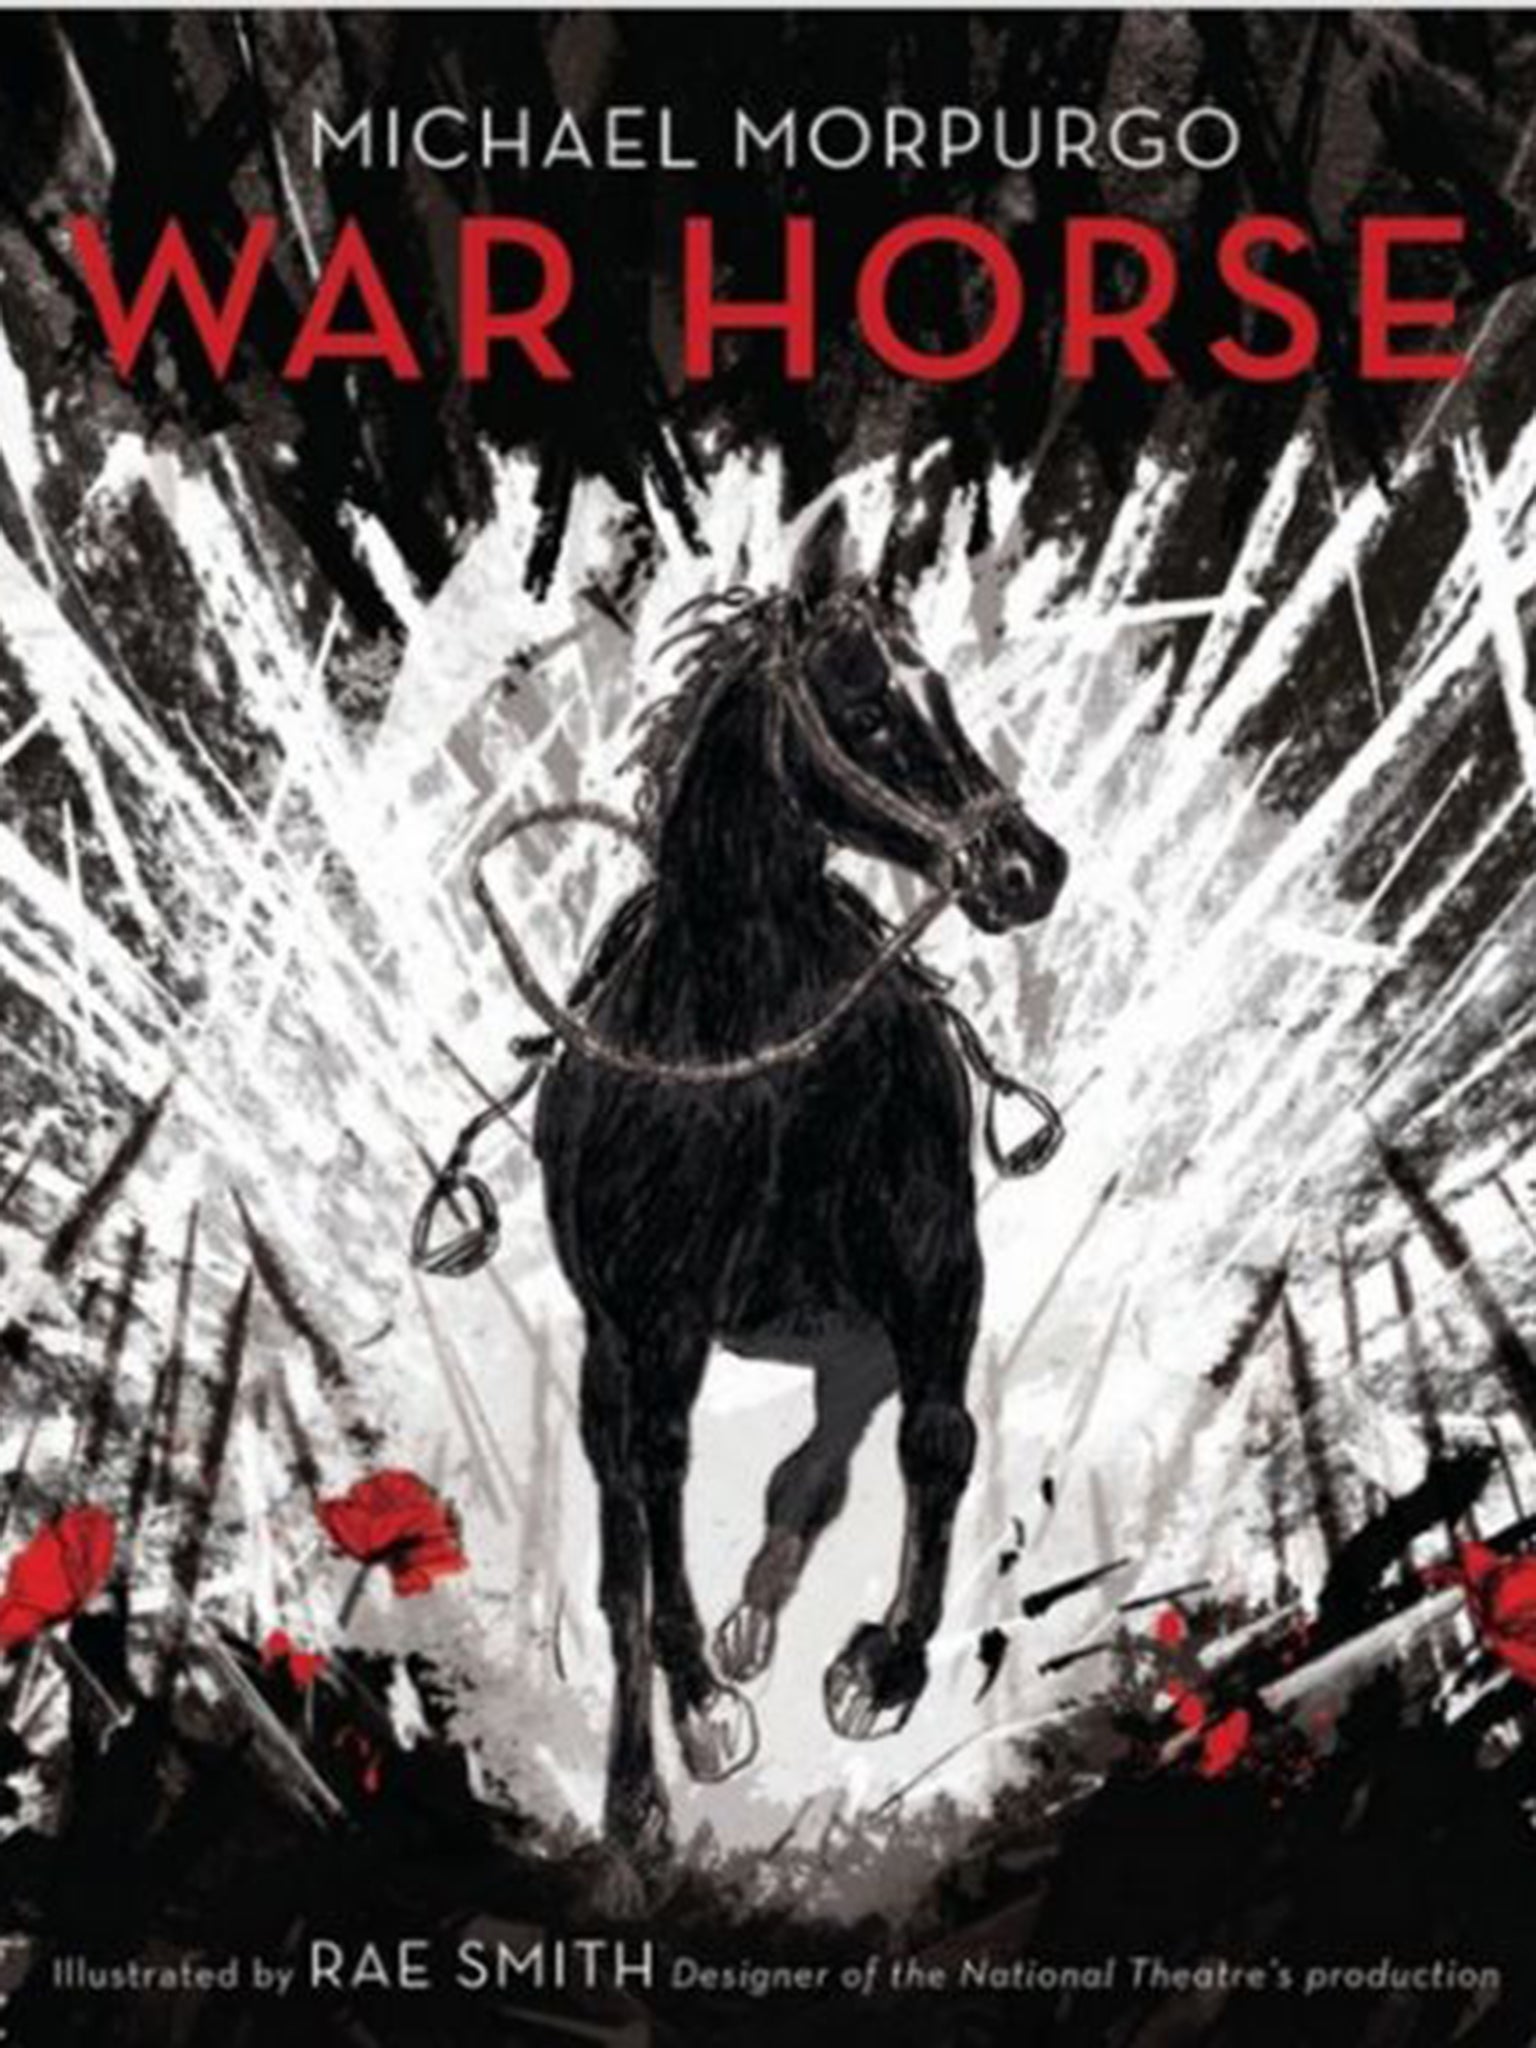 Francois Place’s delicate watercolours have added an extra-poignant dimension to a special edition of Michael Morpurgo’s War Horse